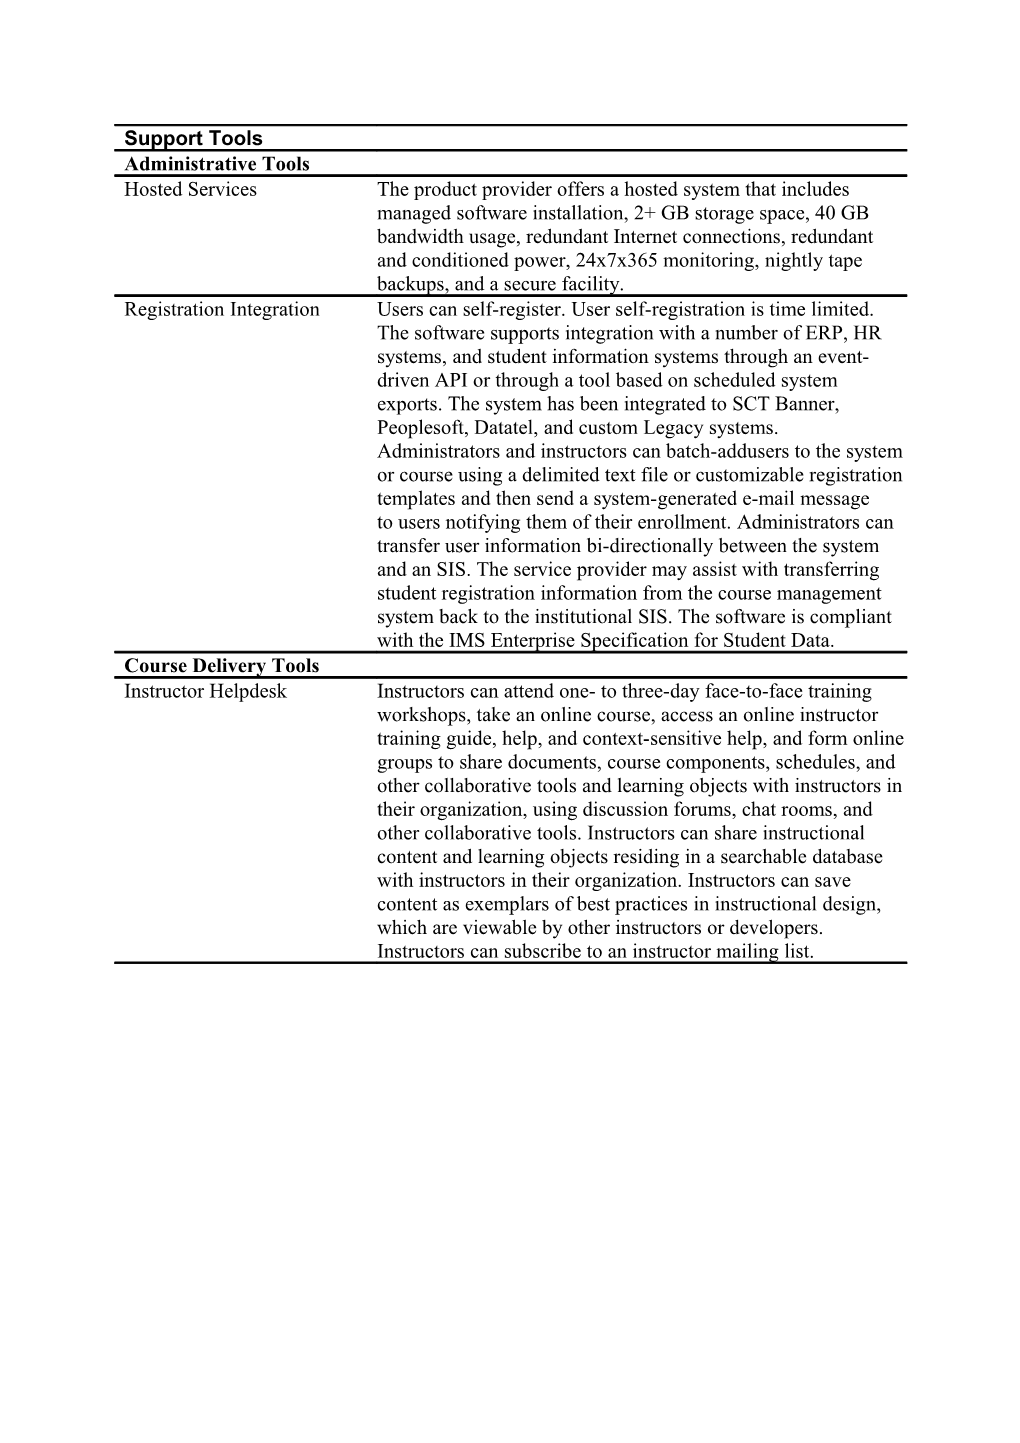 APPENDIX I, Deliverable A1 (August 1, 2004), Page6of6